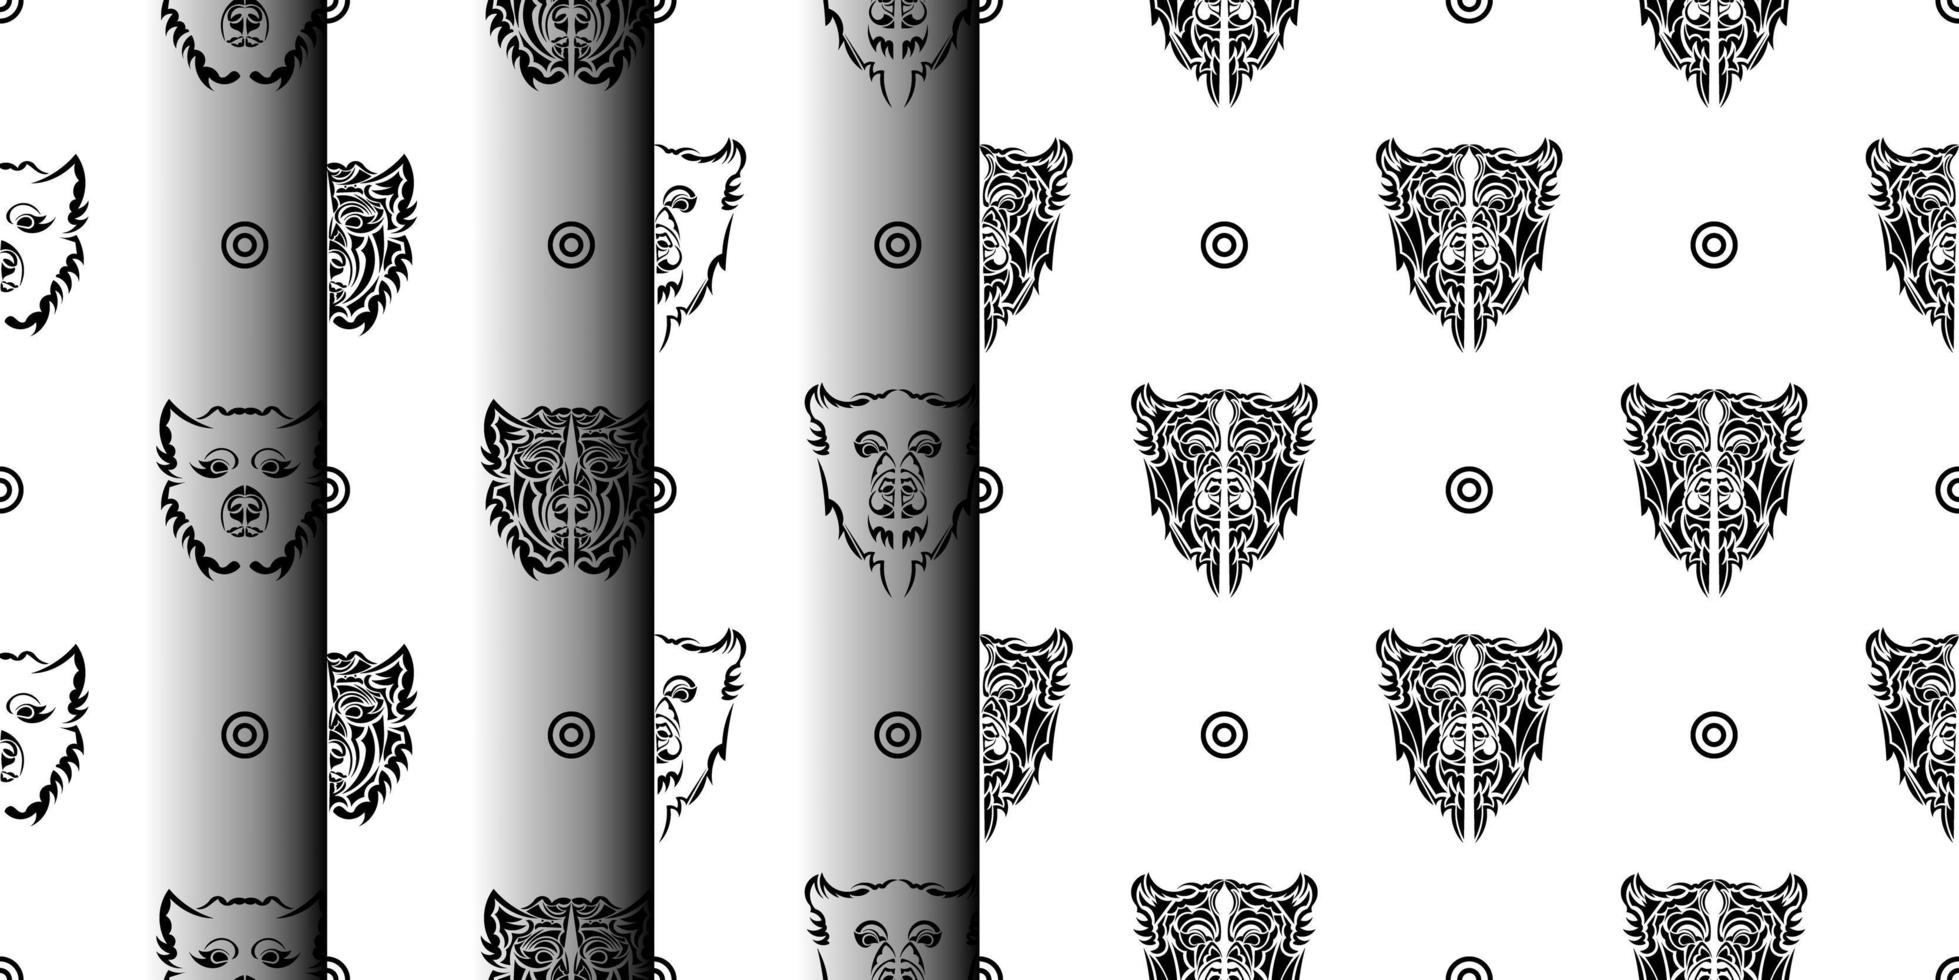 Set of black-white seamless pattern with dog face. Good for backgrounds, prints, apparel and textiles. Vector illustration.